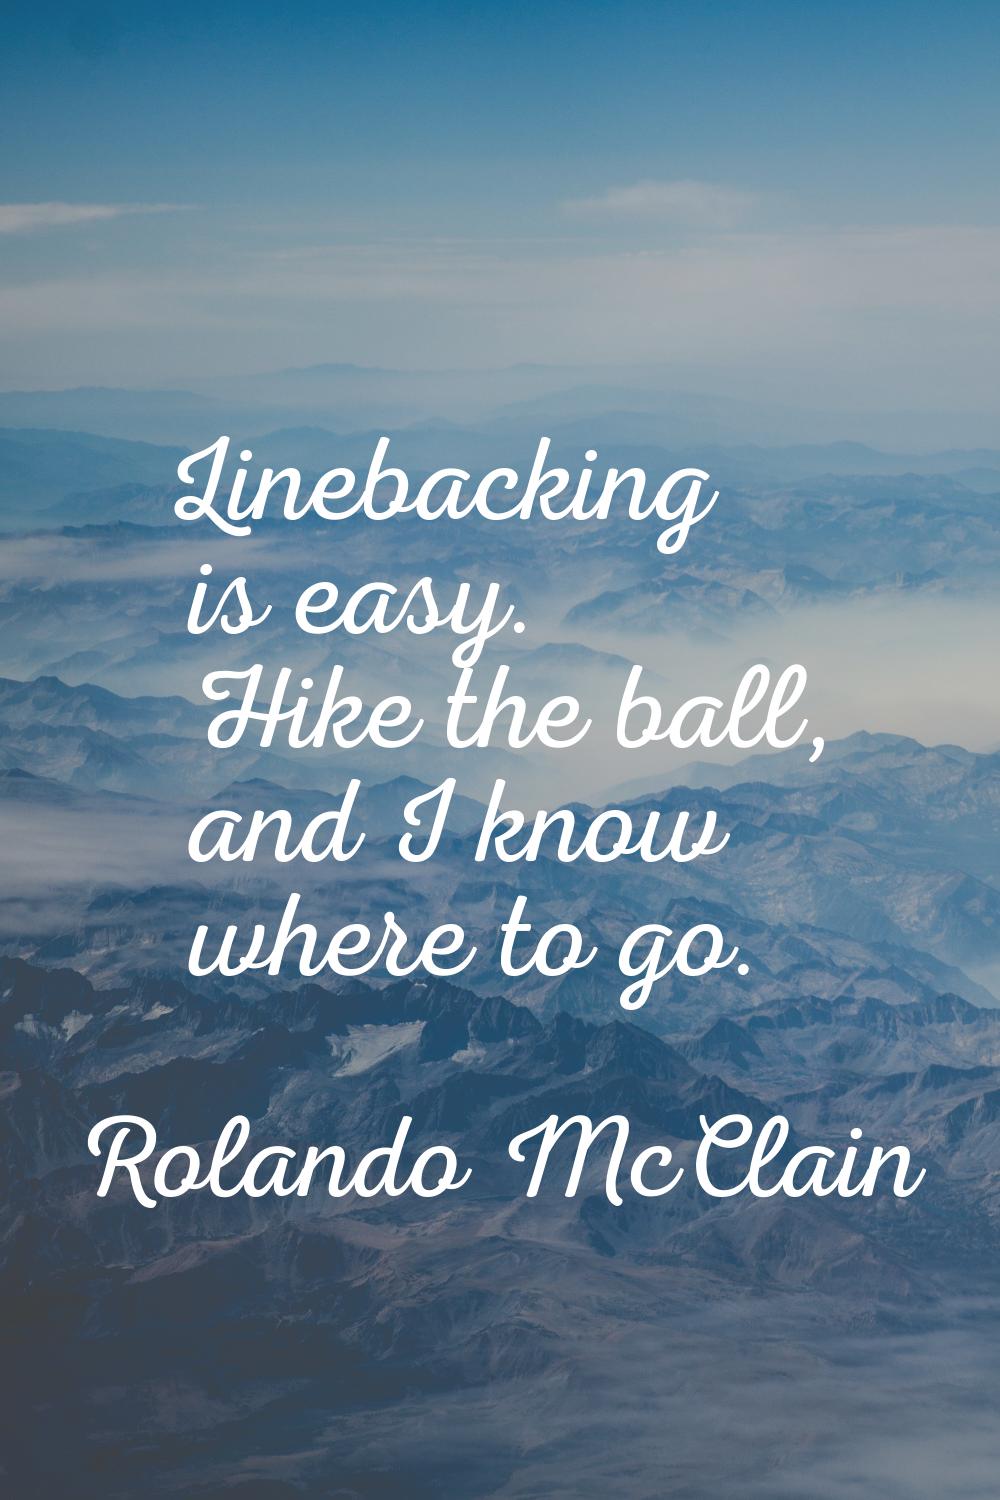 Linebacking is easy. Hike the ball, and I know where to go.